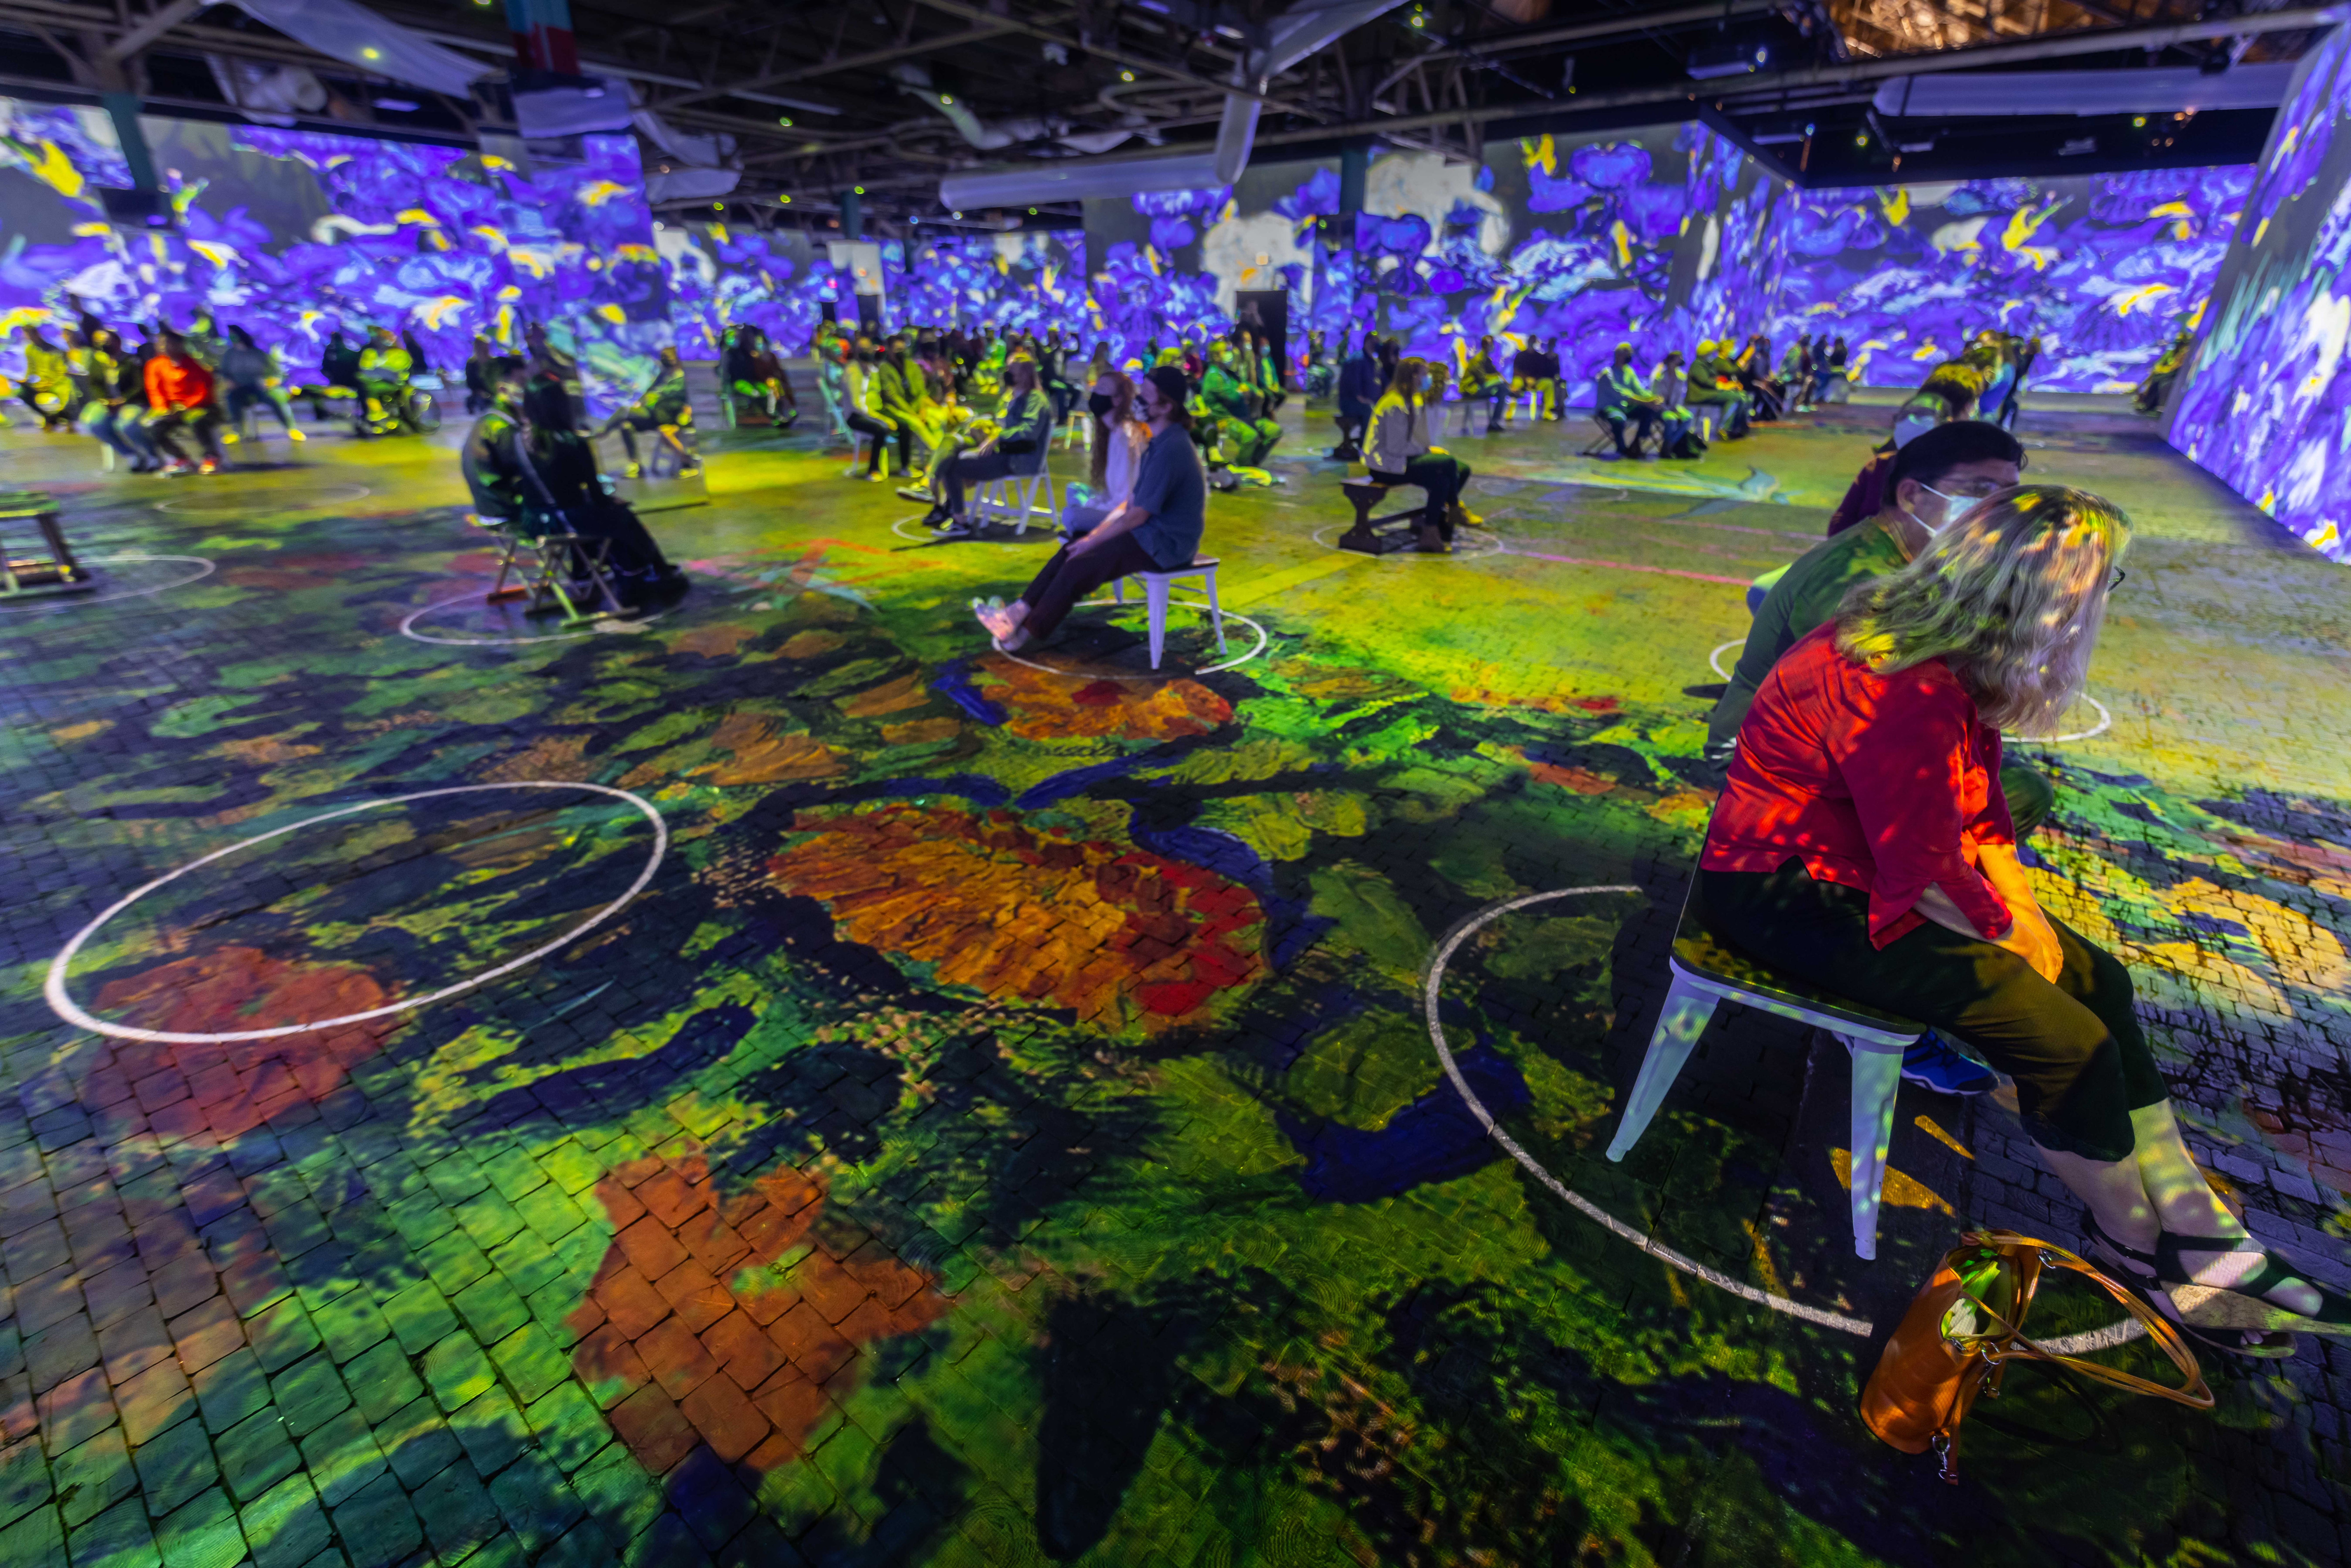 More Info for From (Local) Art to Yoga: How Immersive Van Gogh Has Inspired Charlotte and Why People Keep Gogh-ing Back for More